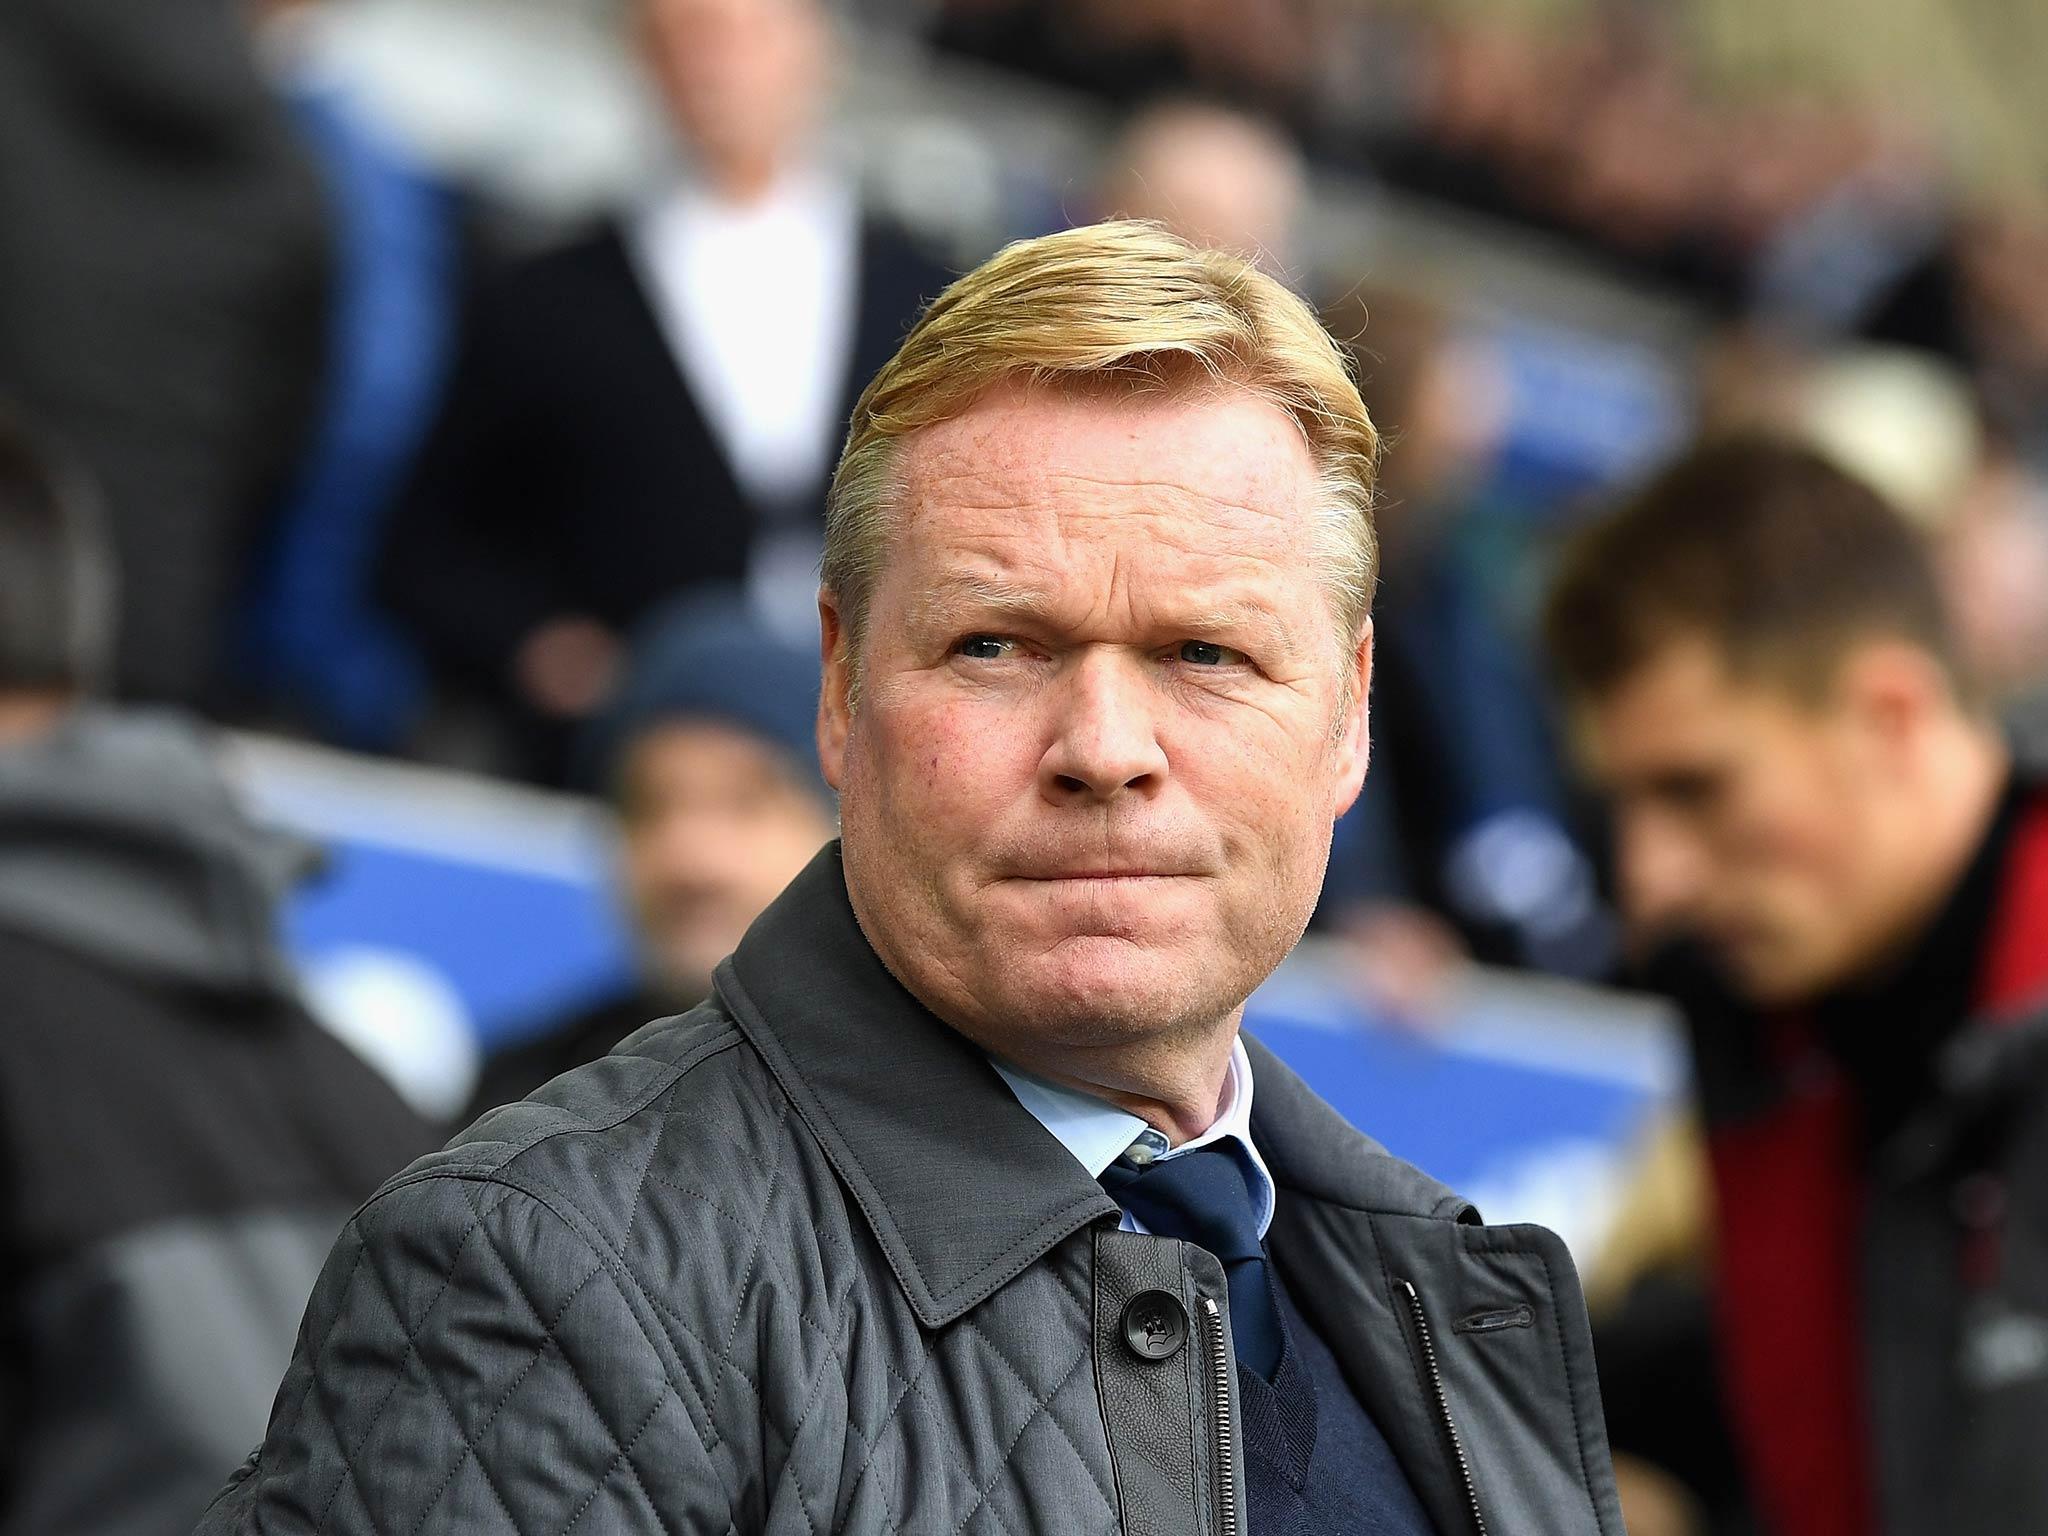 Ronald Koeman has expressed his disappointment at his sacking